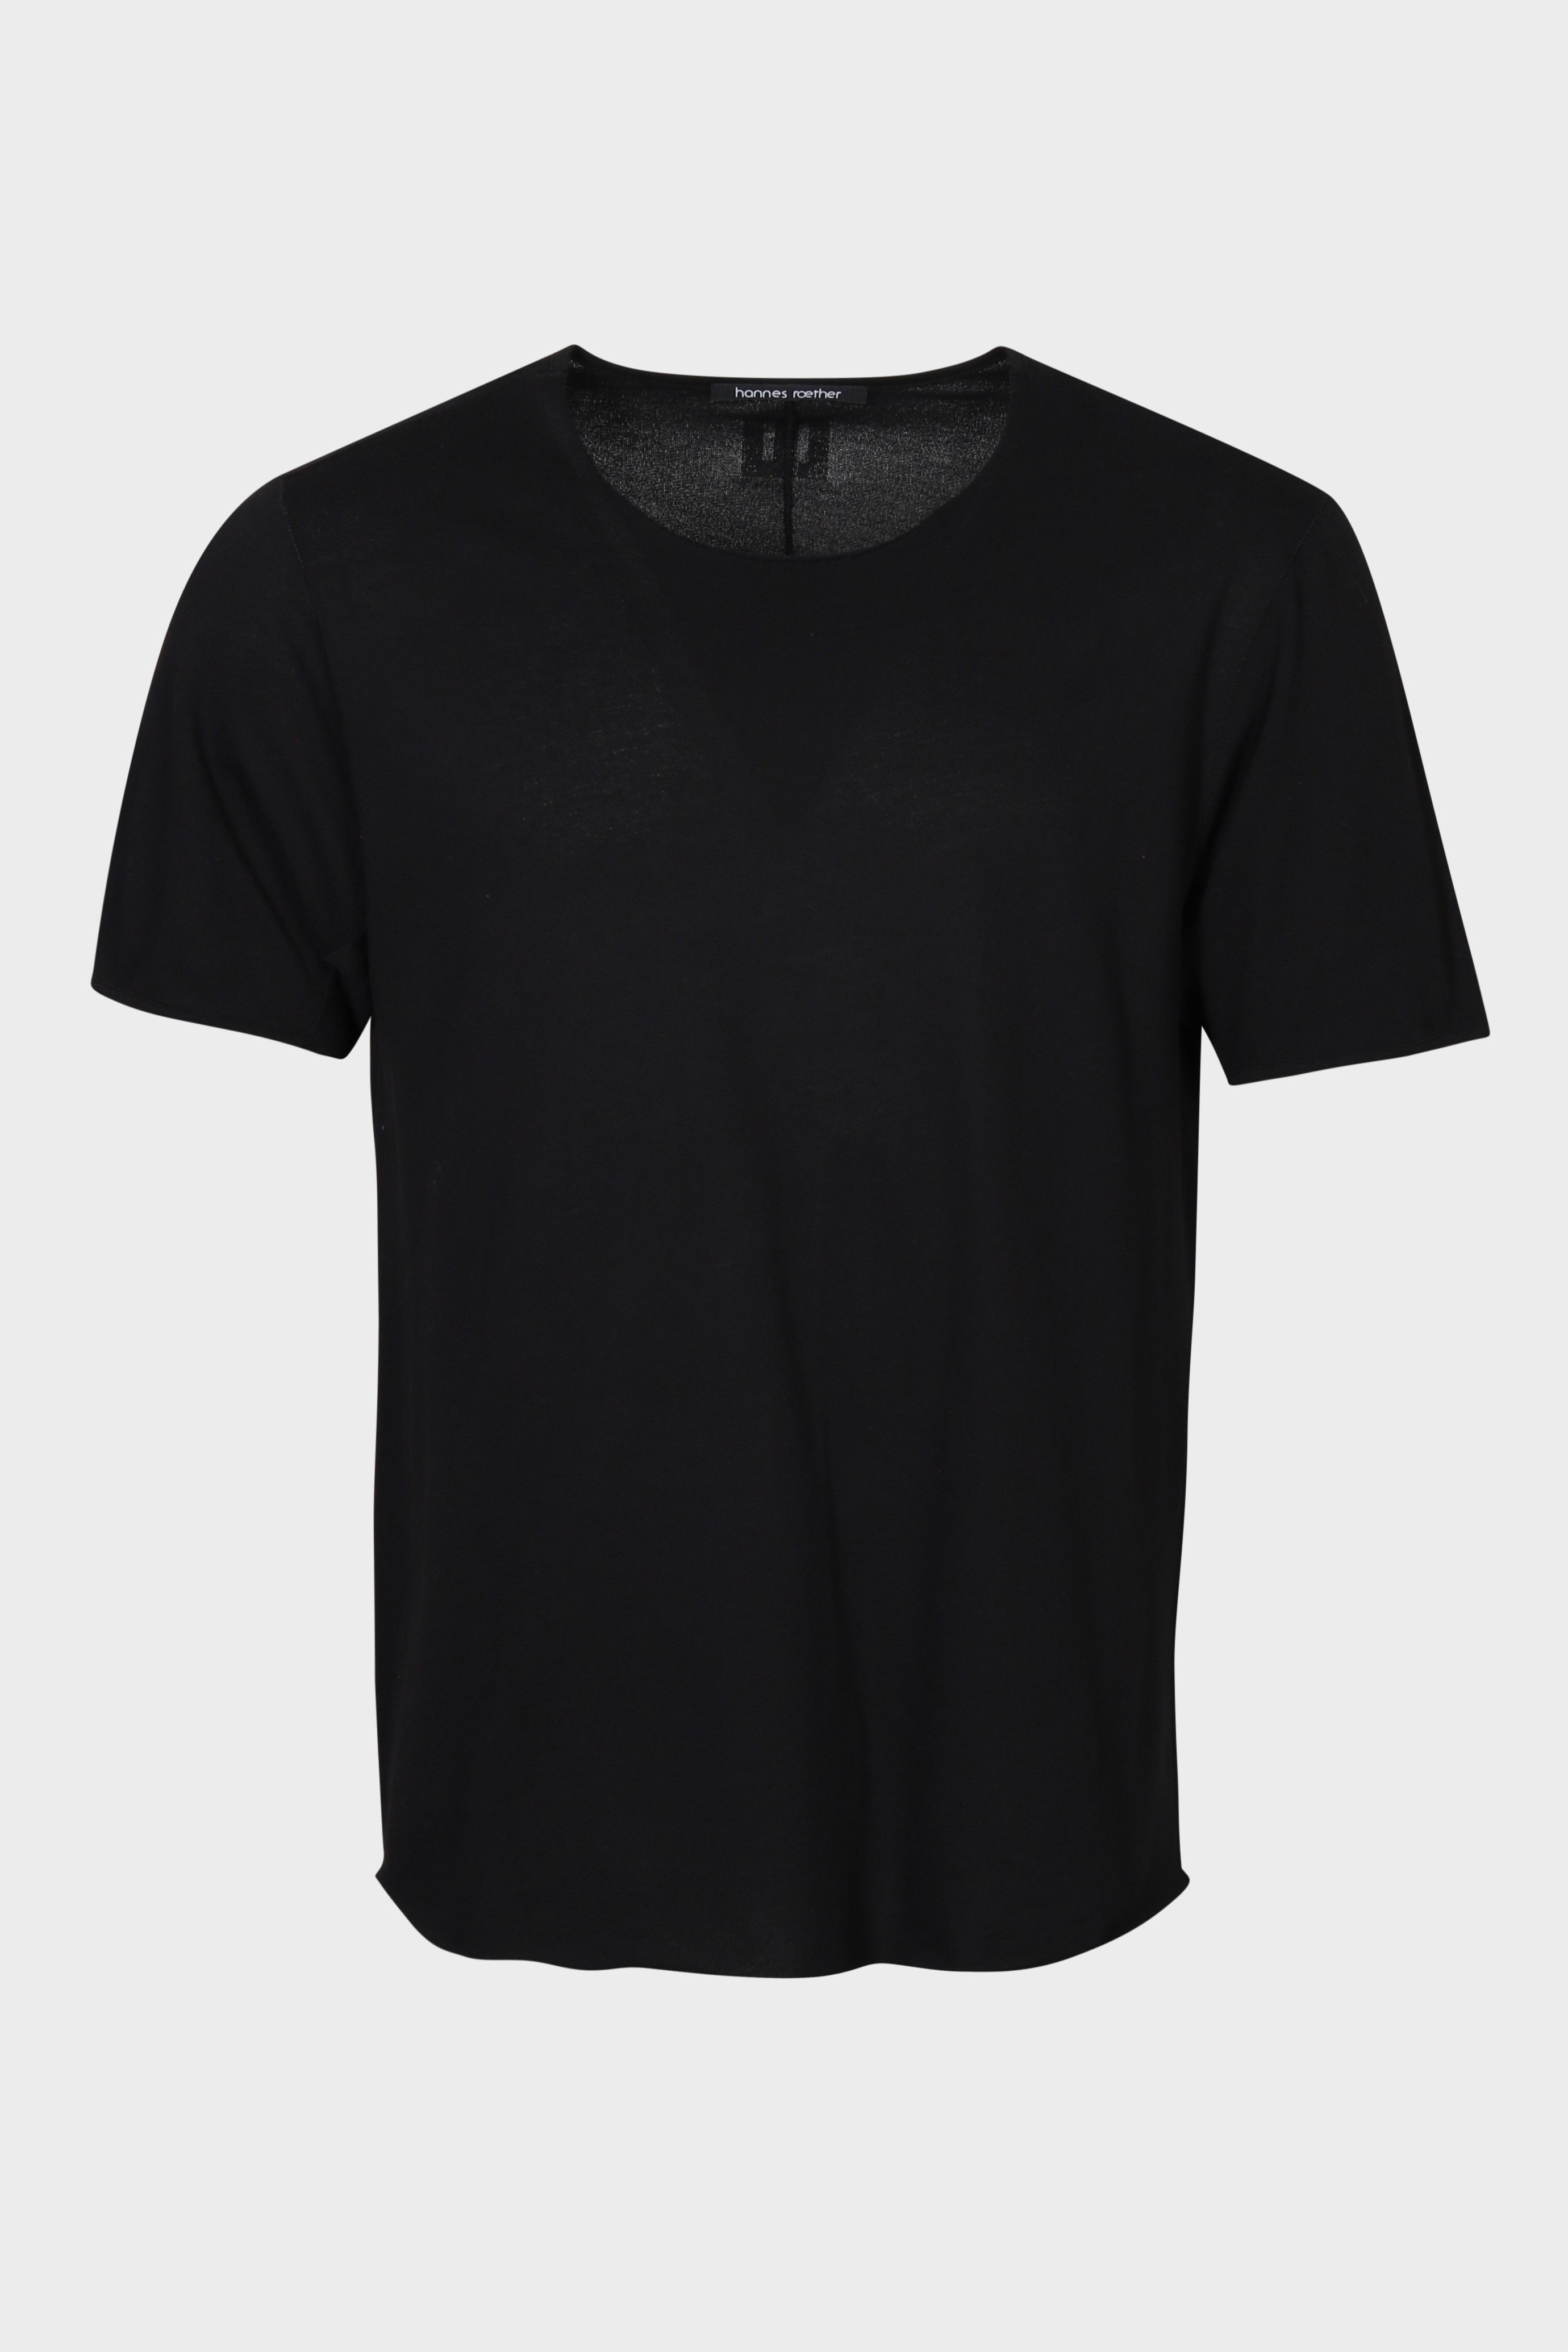 HANNES ROETHER T-Shirt in Black 3XL